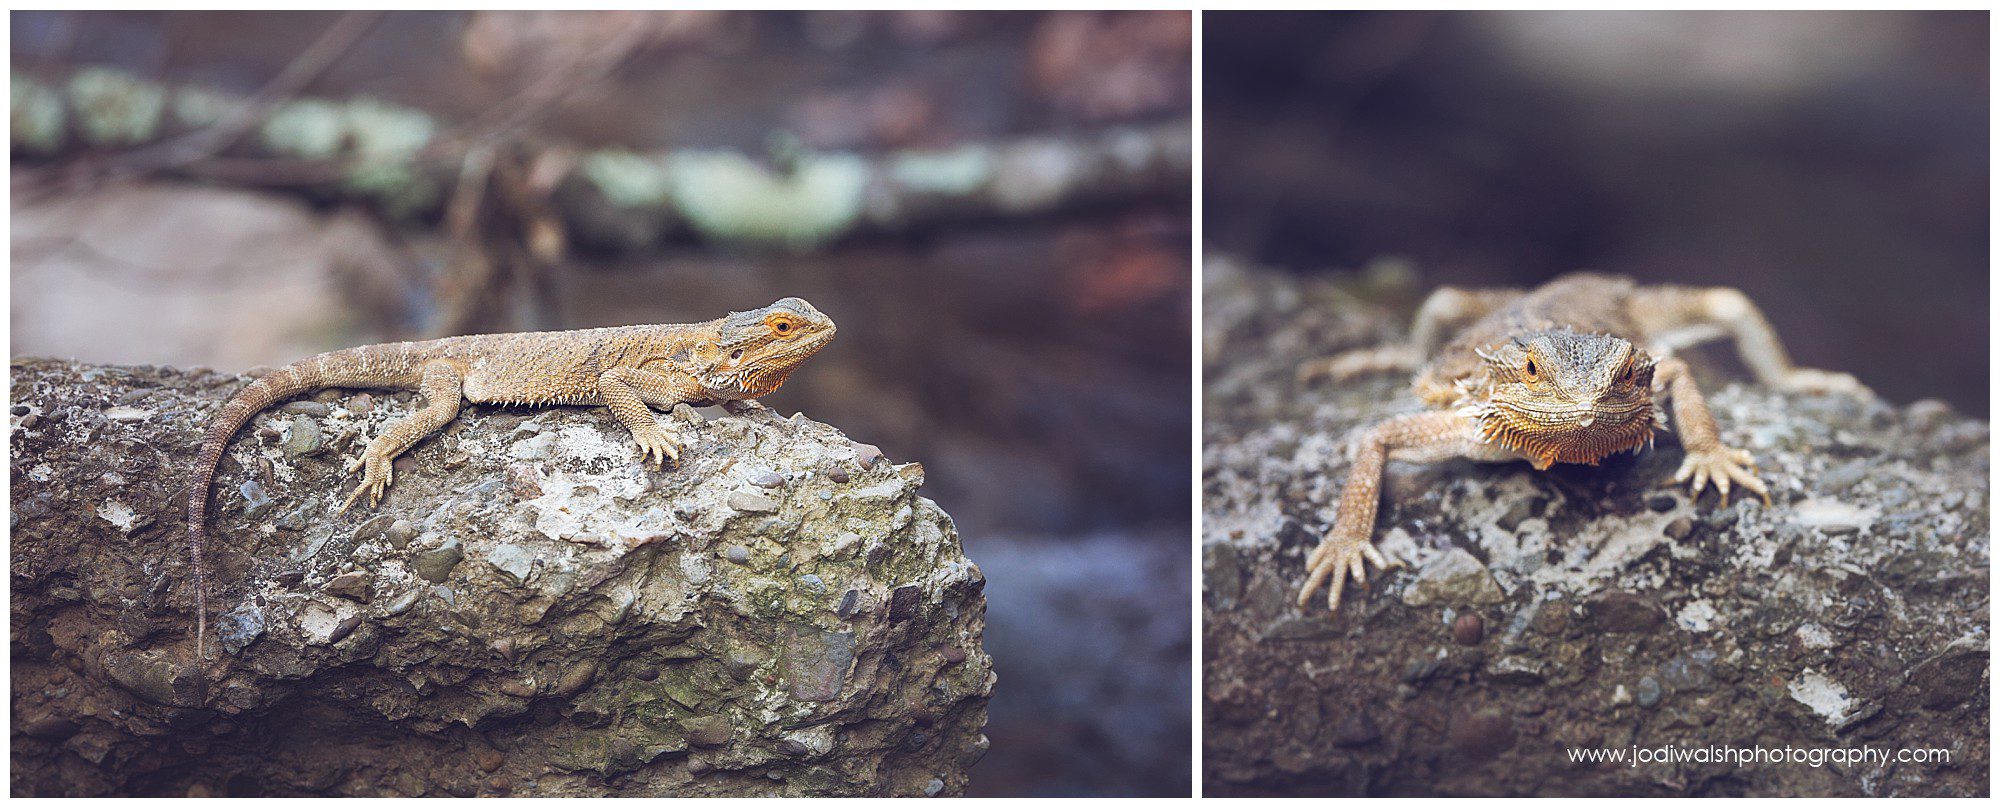 bearded dragon lizard sitting on a rock in a Pittsburgh area park